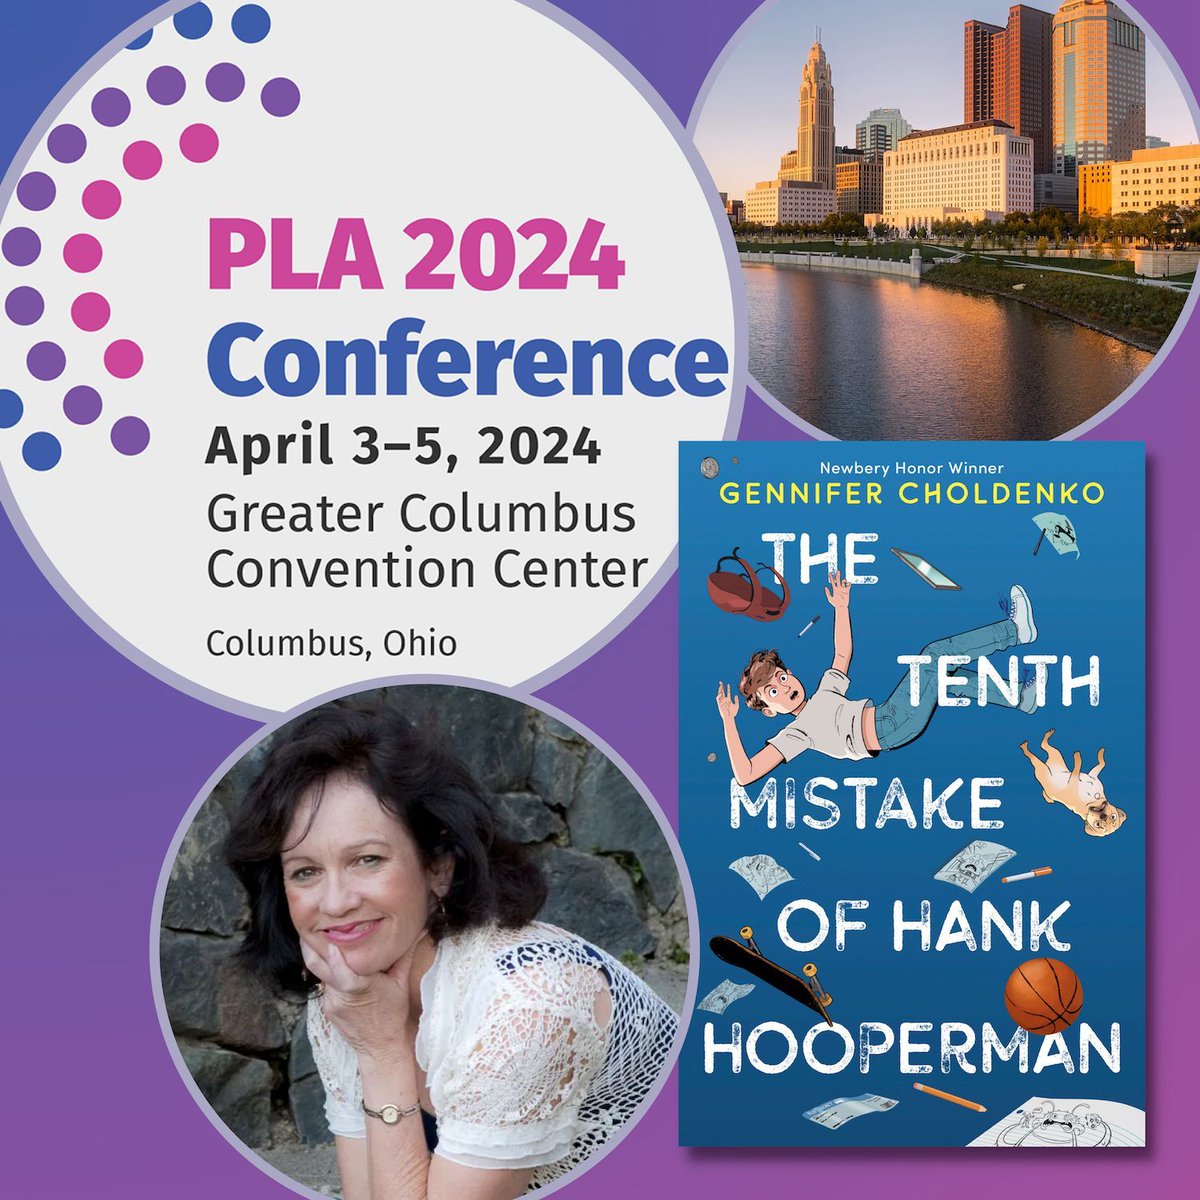 Dear librarians, I'd love to meet you at the @ALA_PLA 2024 Conference on April 4! I'll be signing books at the PLA Children's Breakfast and ARCs of my new #mglit novel, THE TENTH MISTAKE OF HANK HOOPERMAN, at the @BakerandTaylor Signing Booth. placonference.org/event/016e56a2… @KnopfBFYR